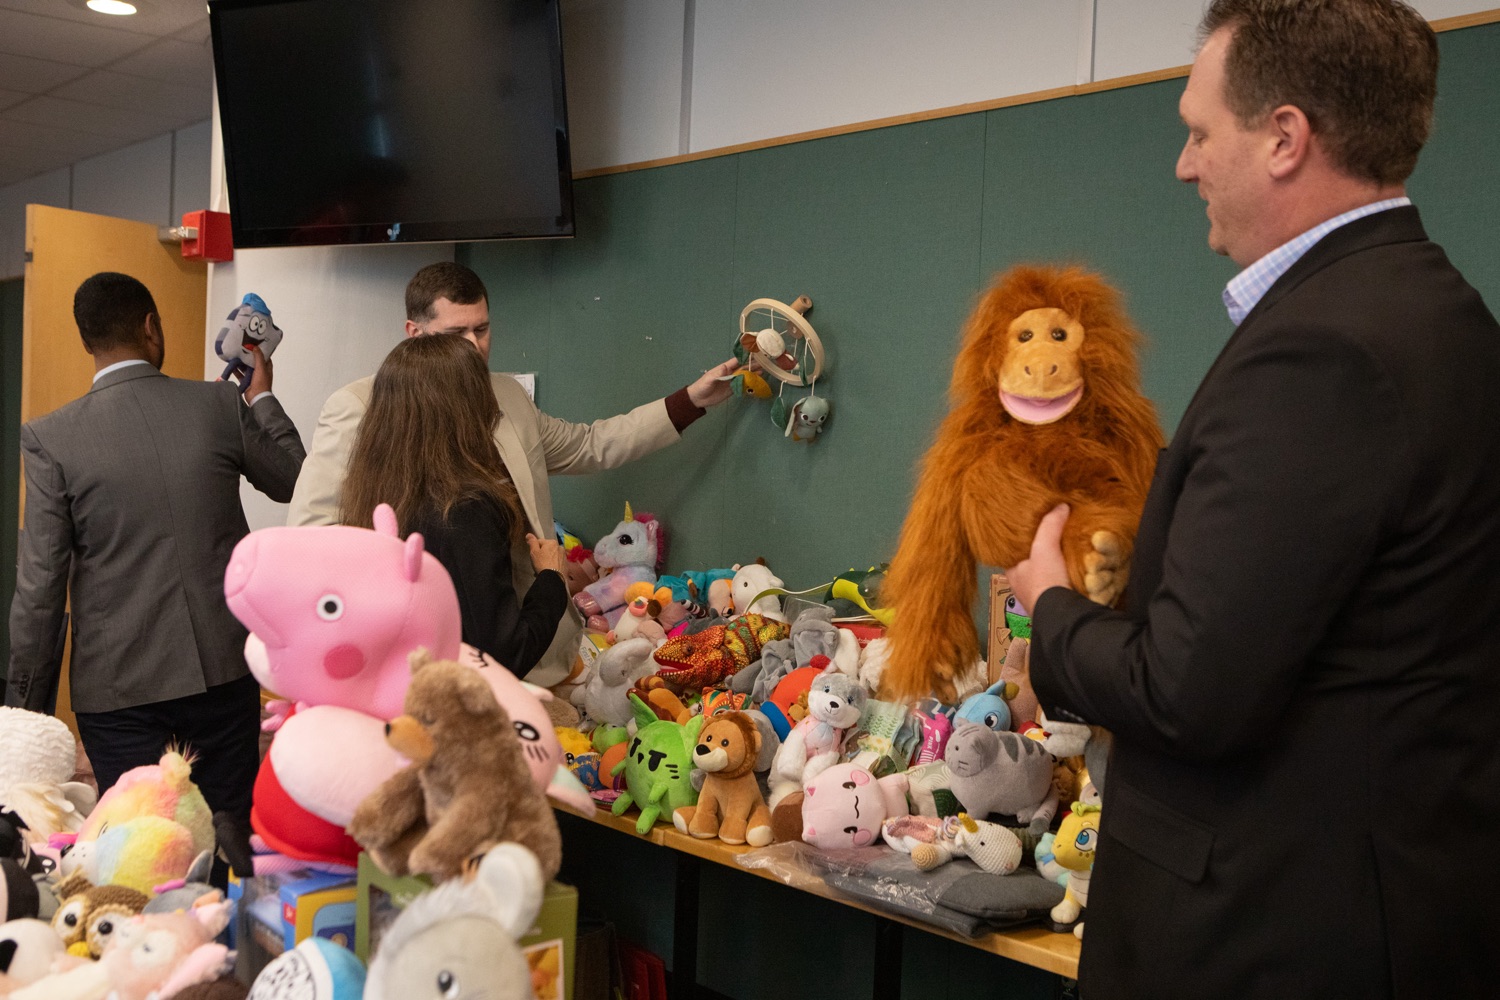 The Pennsylvania Departments of Labor & Industry (L&I) and Human Services (DHS) kicked off the 2023 holiday season Wednesday with an annual donation of stuffed toys collected throughout the year by L&I during routine safety inspections. The toys will be distributed to Pennsylvania families through DHS Holiday Wish program. . ."We inspect these stuffed toys throughout the year to ensure their safety for all children in Pennsylvania. Its become a tradition at L&I to donate the inspected toys to the Holiday Wish program because we get to brighten the holidays for a few children while reminding parents and retailers of the importance of toy safety, L&I Secretary Nancy A. Walker. I encourage any Pennsylvanian who can give a little extra this year to consider donating to a holiday charity. The joy and happiness through a simple act of kindness can lead to lifelong memories for countless Pennsylvania children.<br><a href="https://filesource.amperwave.net/commonwealthofpa/photo/24018_LI_StuffedToys_ERD_009.jpg" target="_blank">⇣ Download Photo</a>